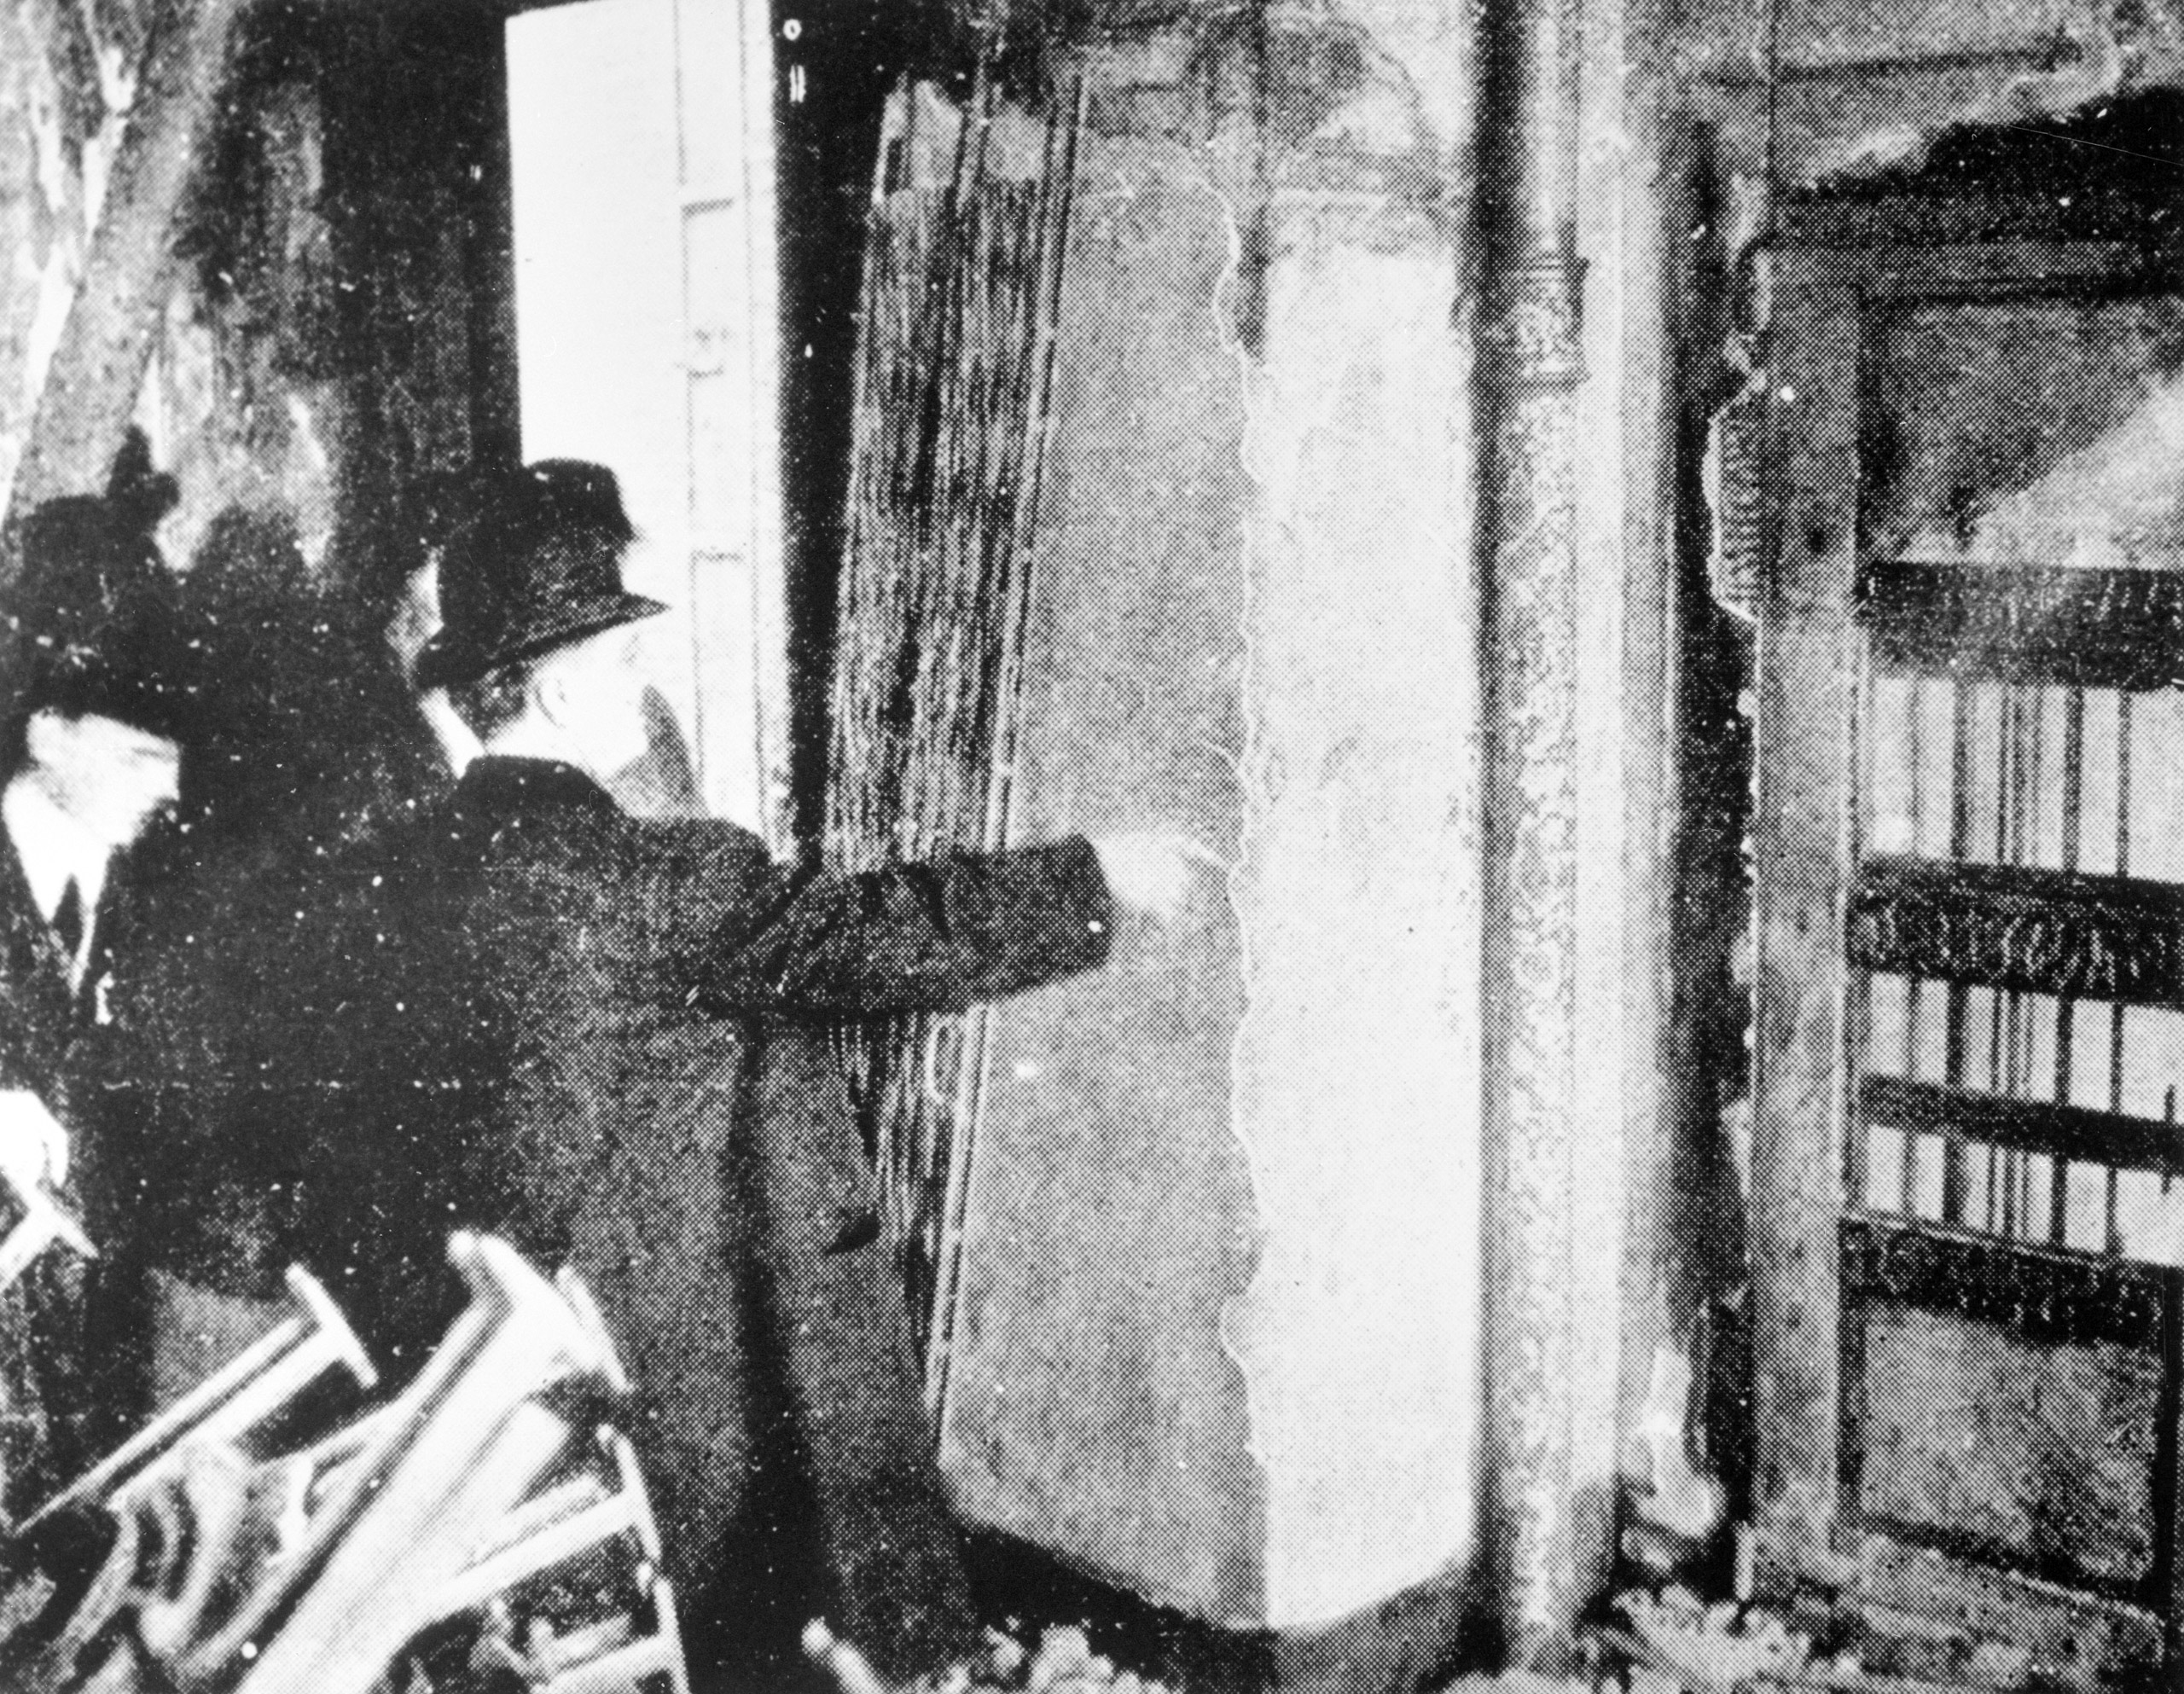 One of the doors at the Triangle Shirtwaist factory after the fire disaster. It had been locked—as it usually was, until the janitor searched the girls for pieces of stolen goods.